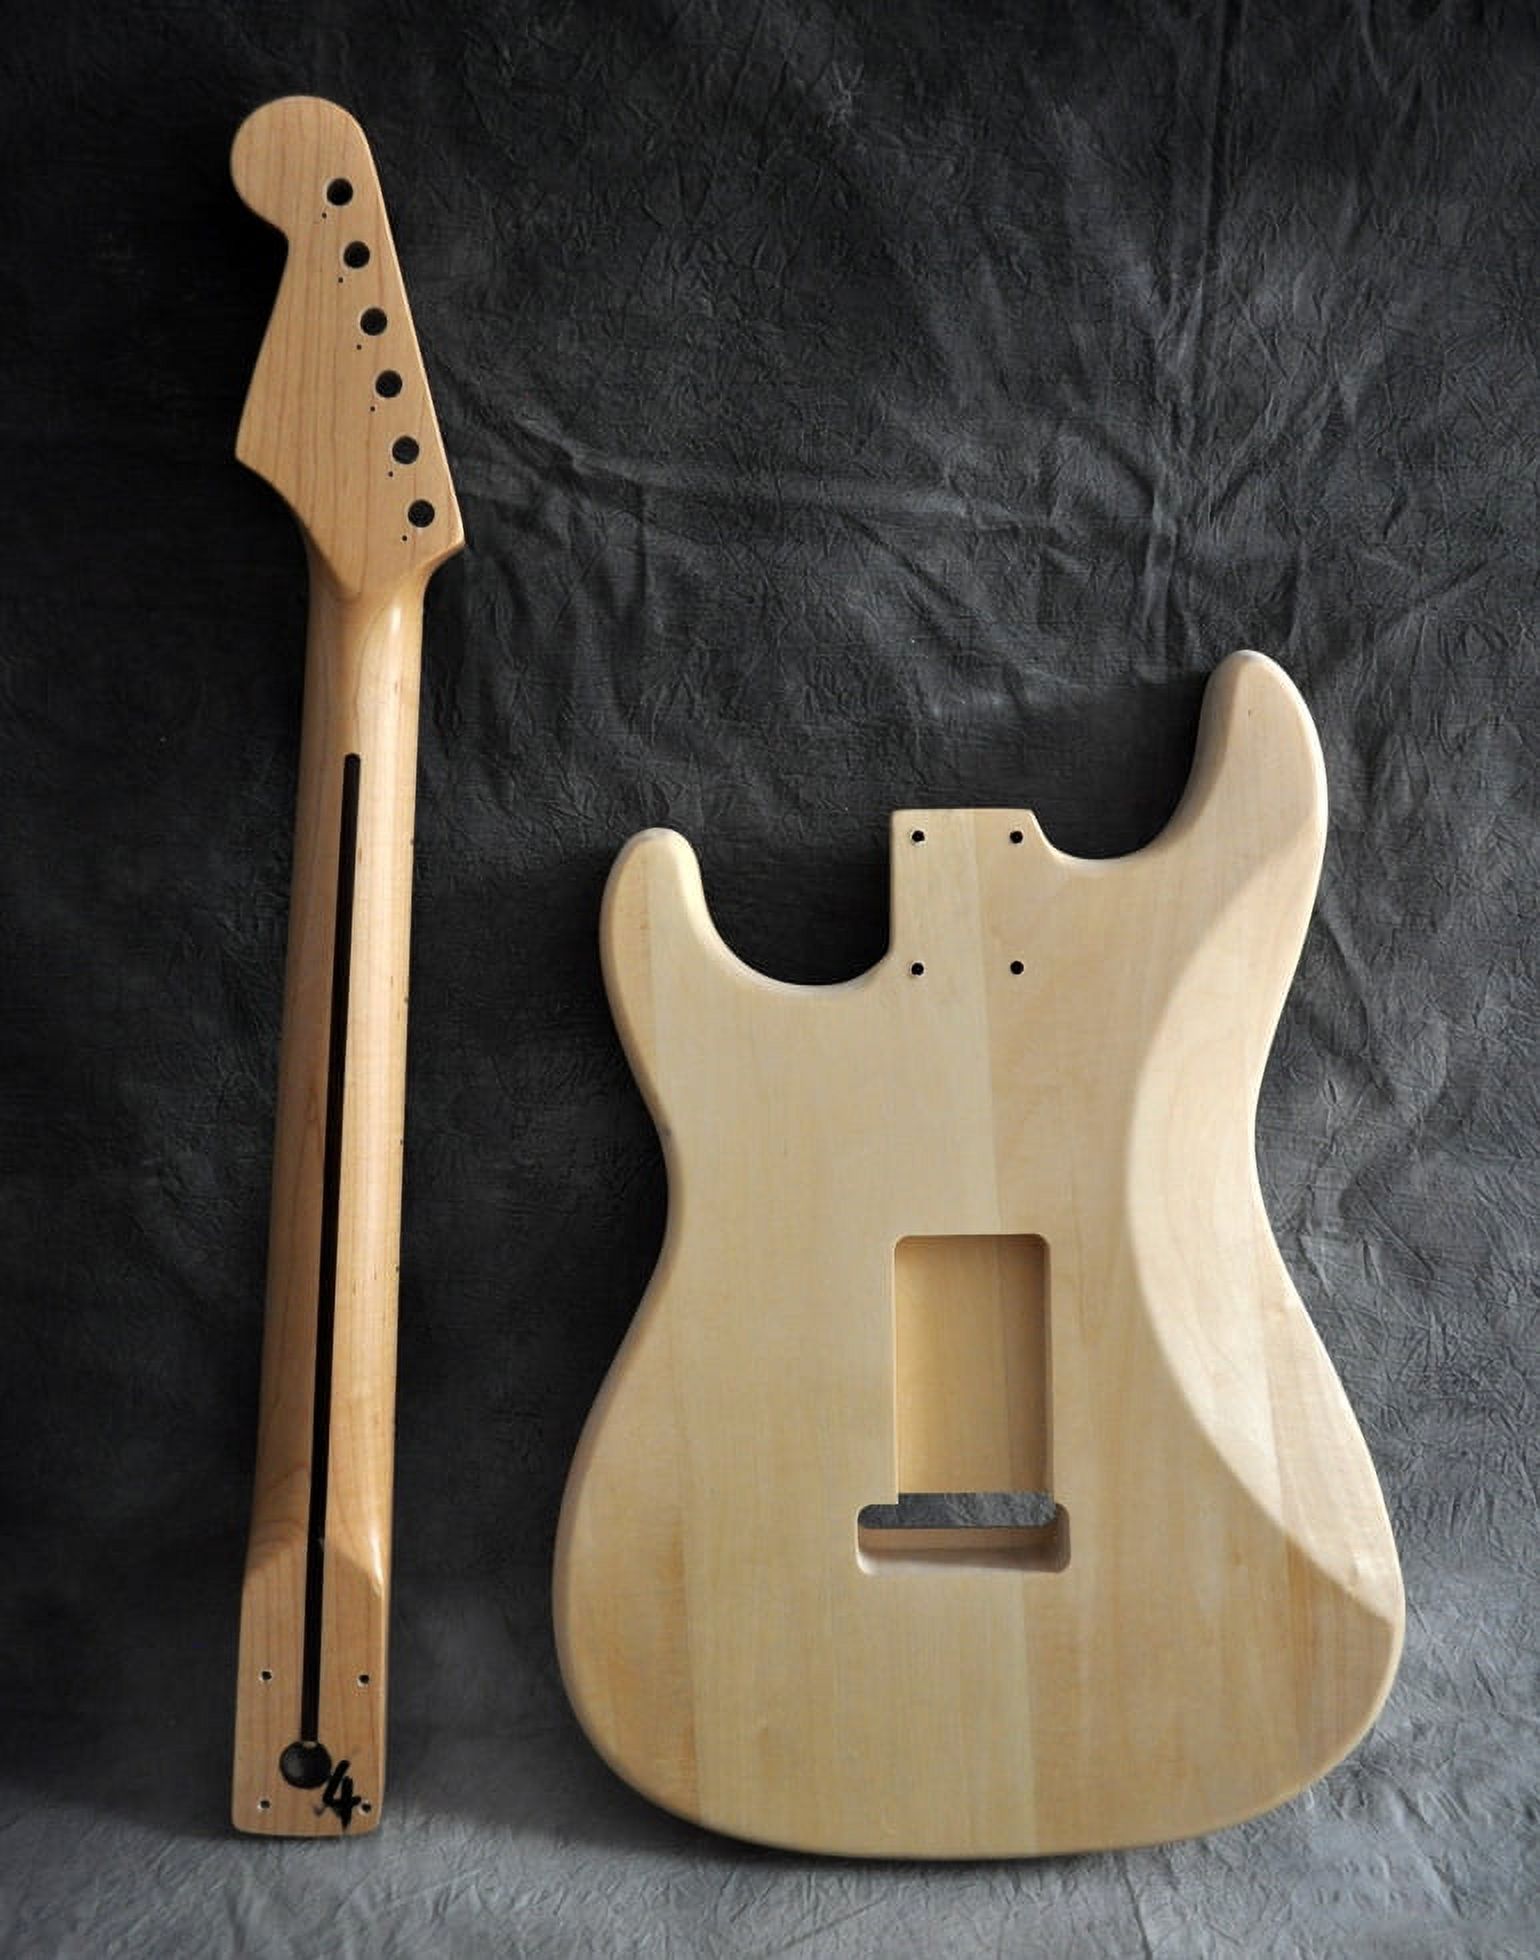 RSW DIY Electric Guitar kit with Basswood Body Maple Neck and Fingerboard 21 Frets S-S-S Pickups Bolt On - image 3 of 6